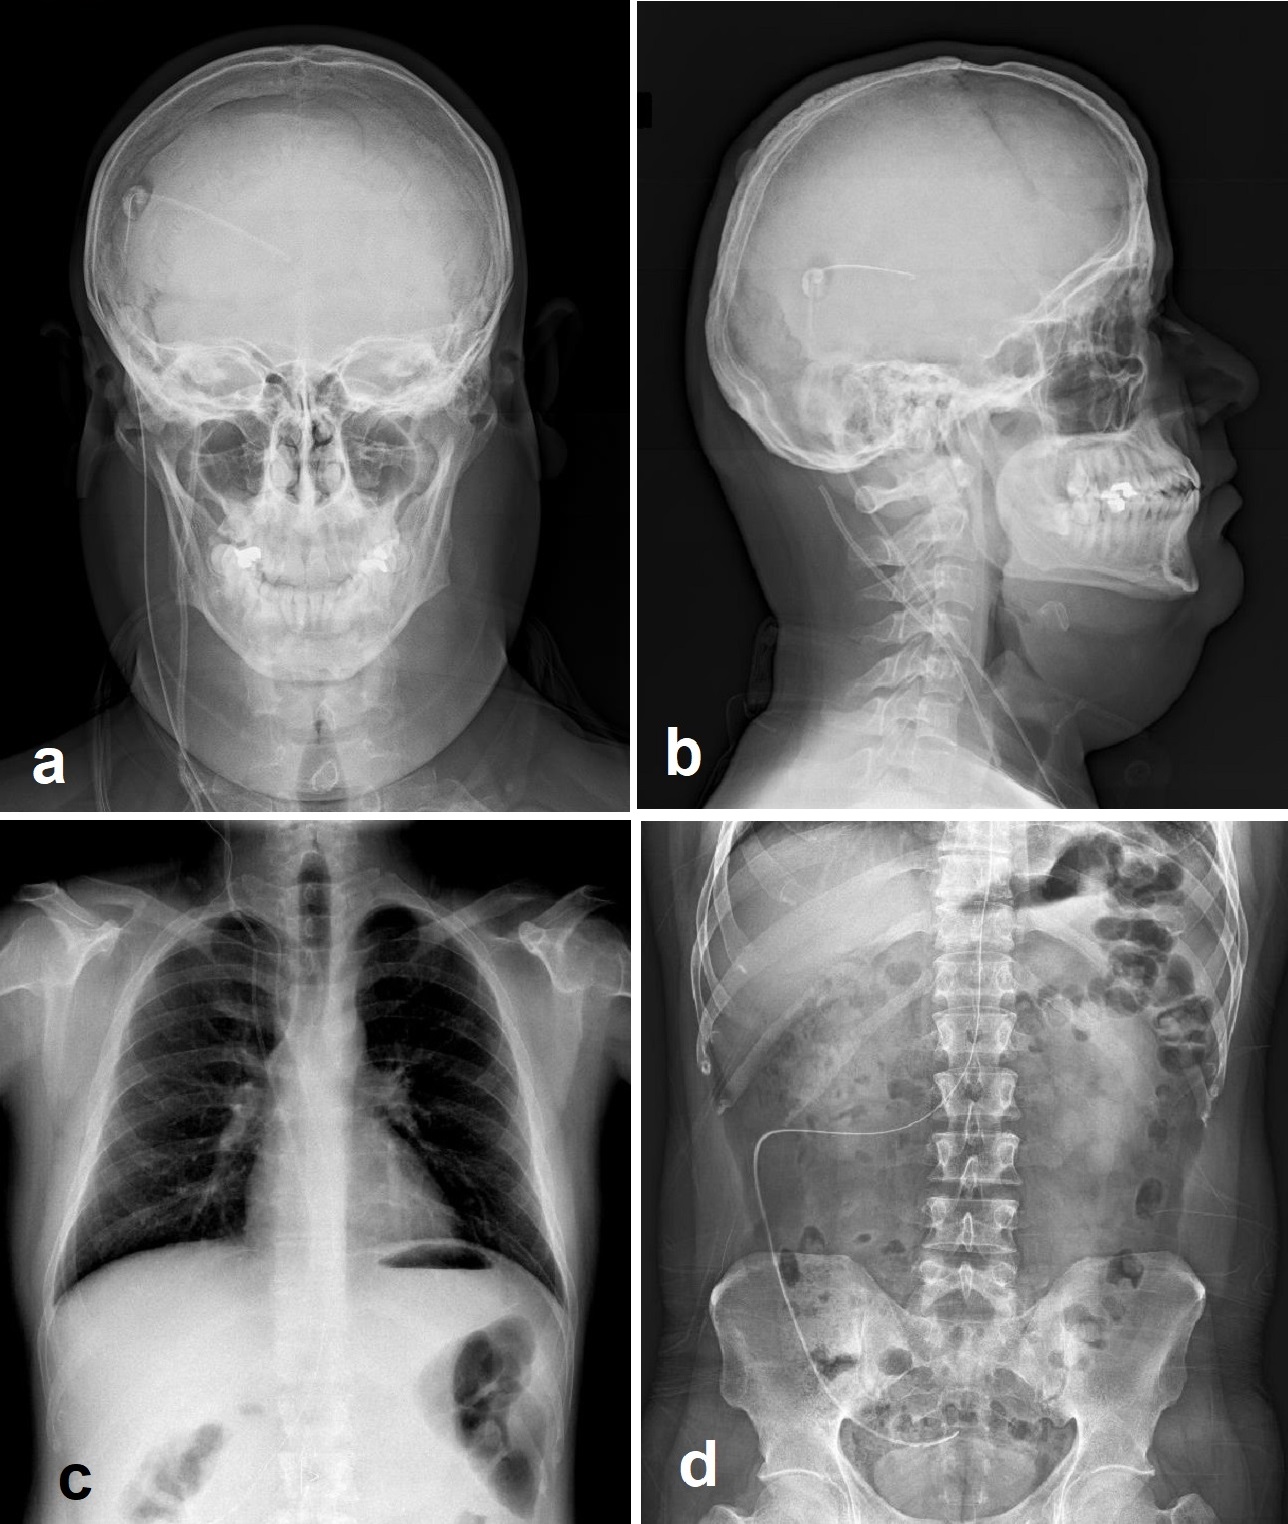 Shunt series including biplanar head (a and b), anteroposterior chest (c) and anteroposterior abdominal (d) radiographs demonstrating the ventriculoperitoneal shunt catheter throughout its course.